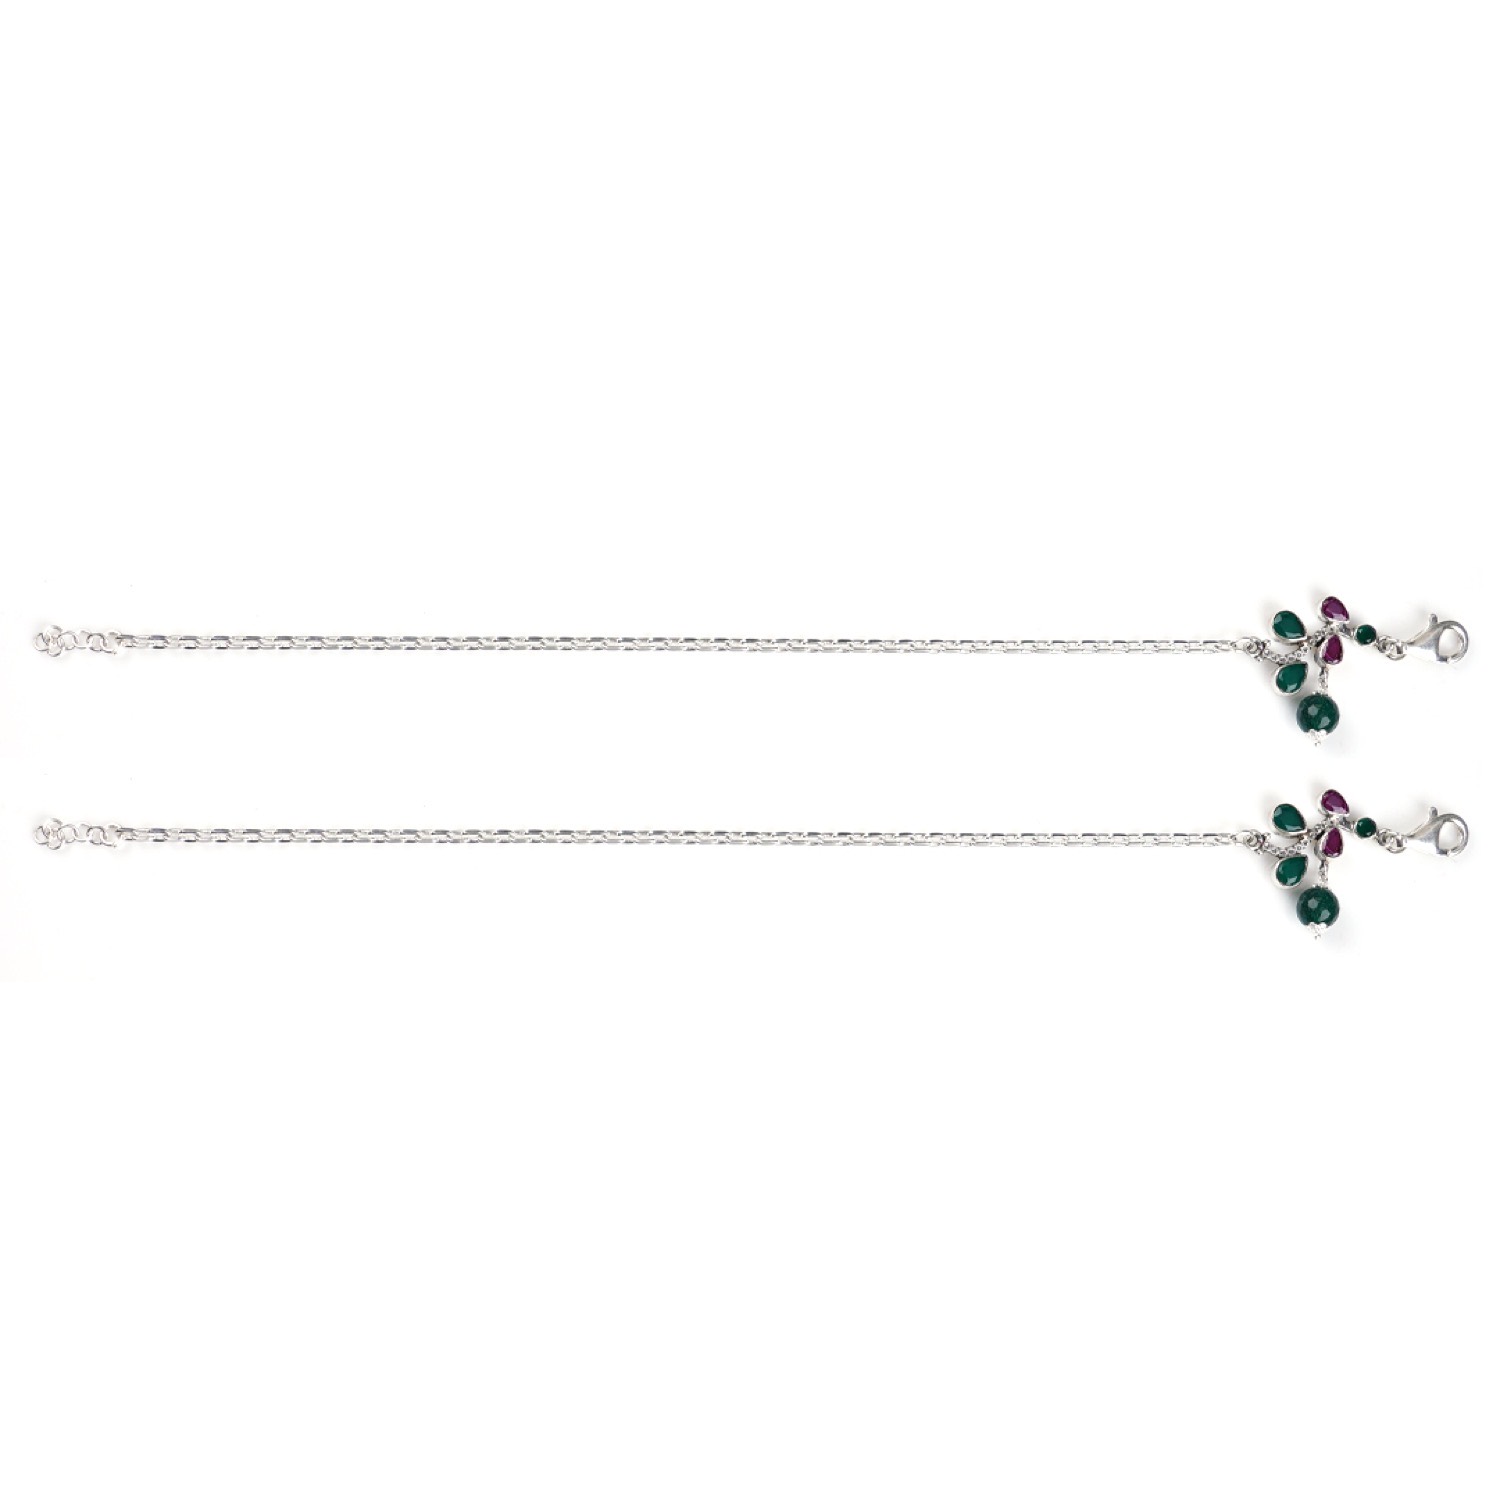 varam_anklets_072022_green_and_pink_stone_silver_anklets_100-1